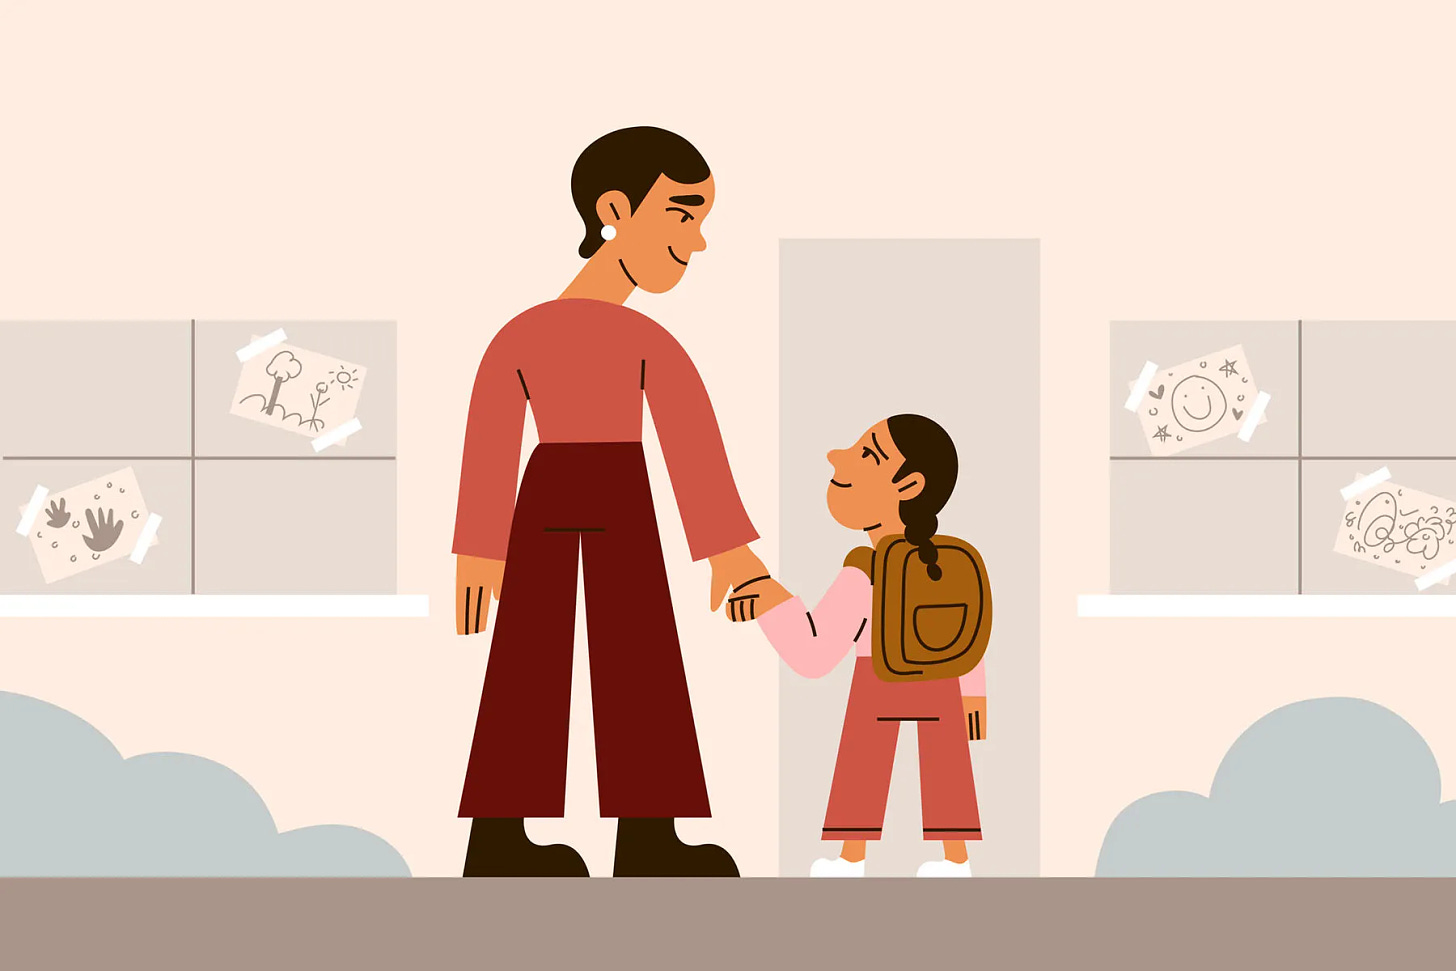 A digital illustration of a parent and child holding hands and smiling at each other while standing in front of the door of a building. The windows on the building display taped up children’s artwork.